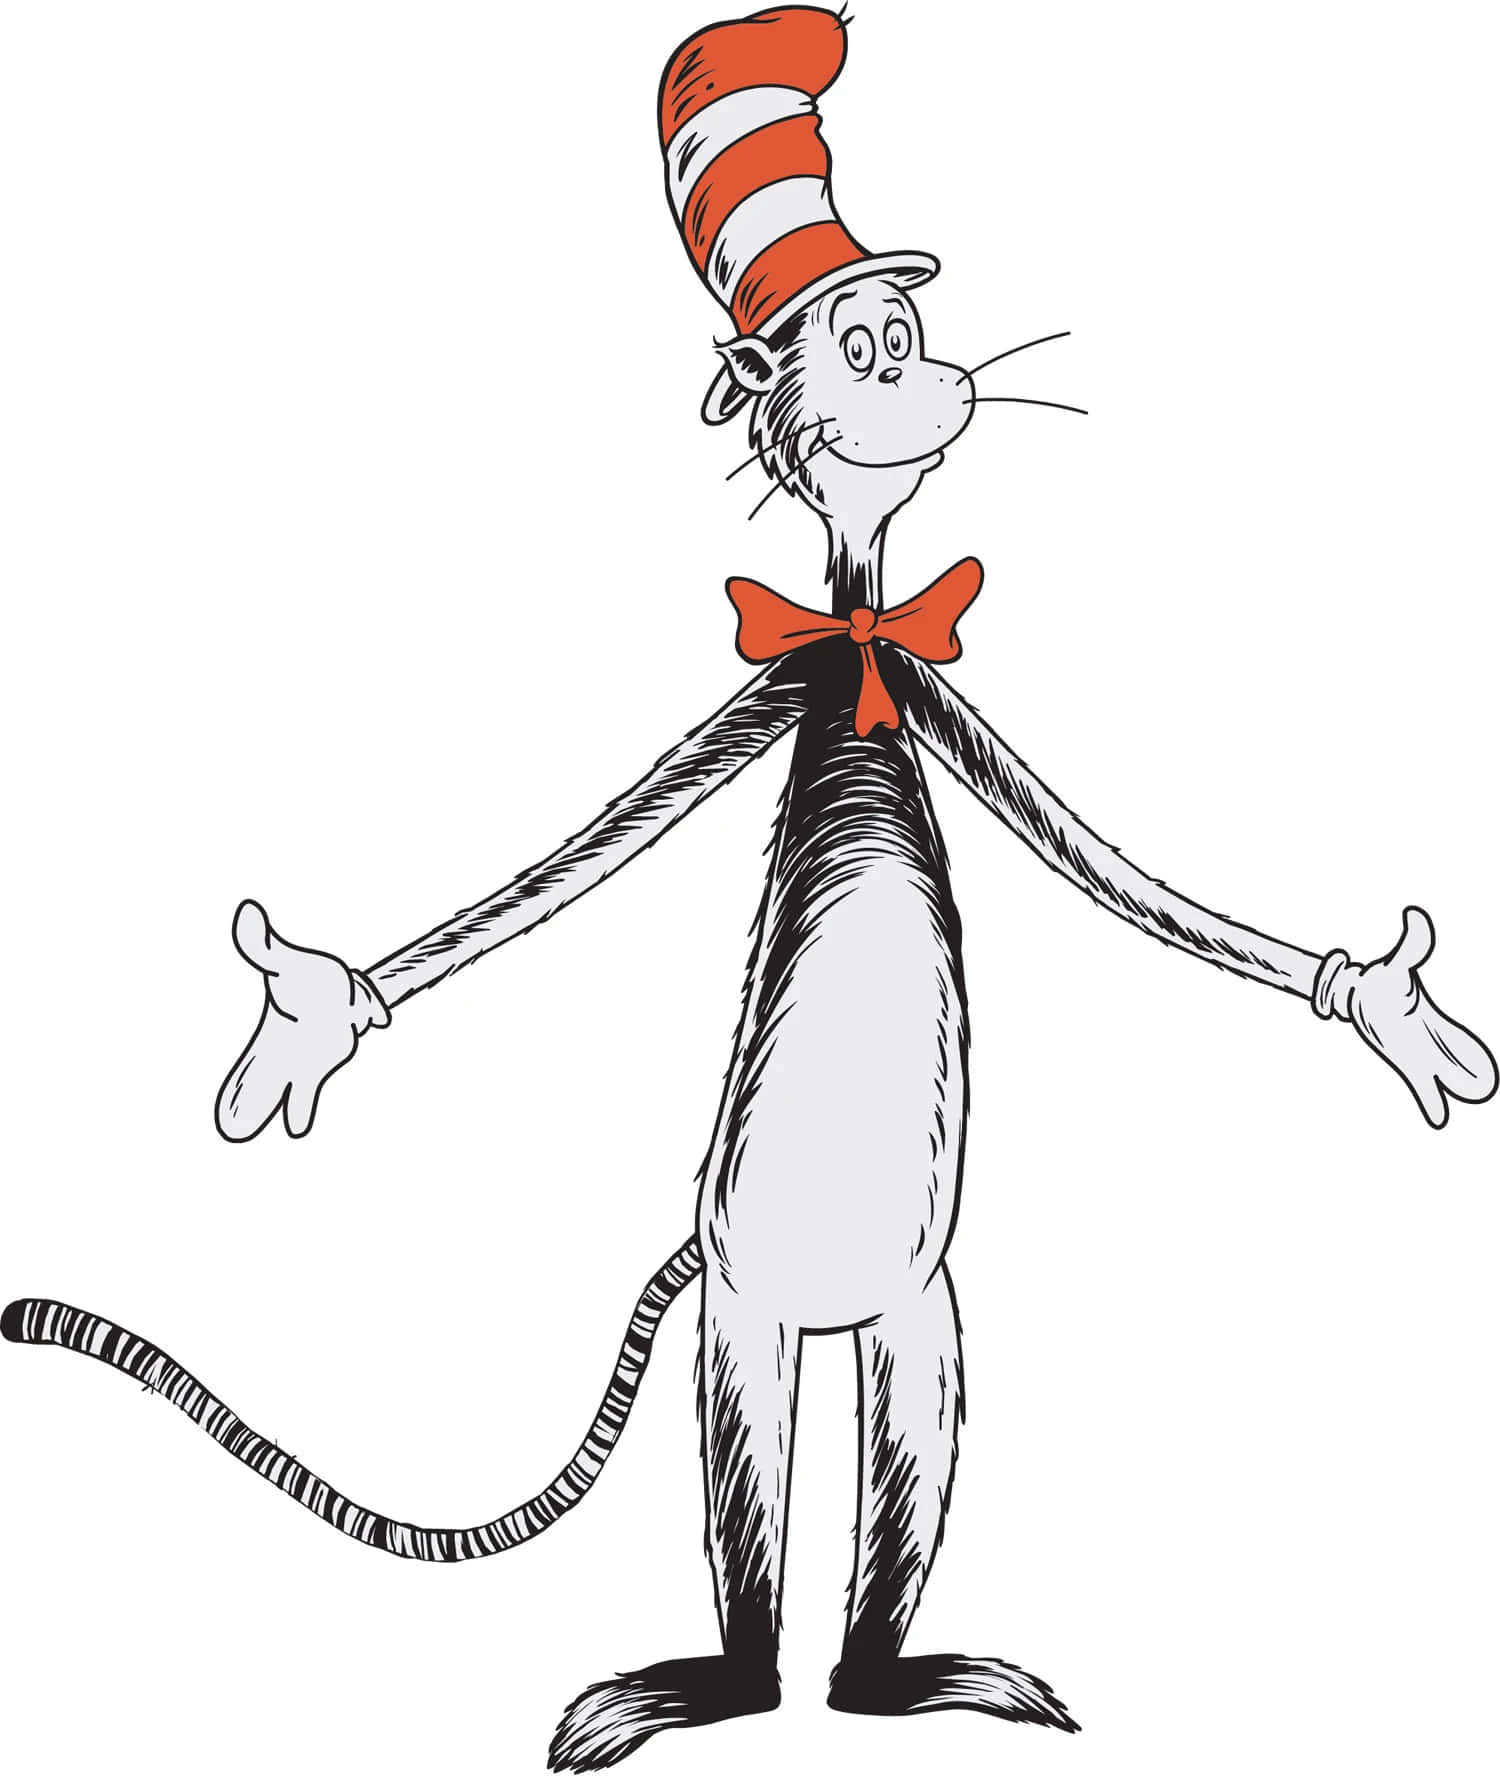 The Cat in the Hat, doing what he loves best!